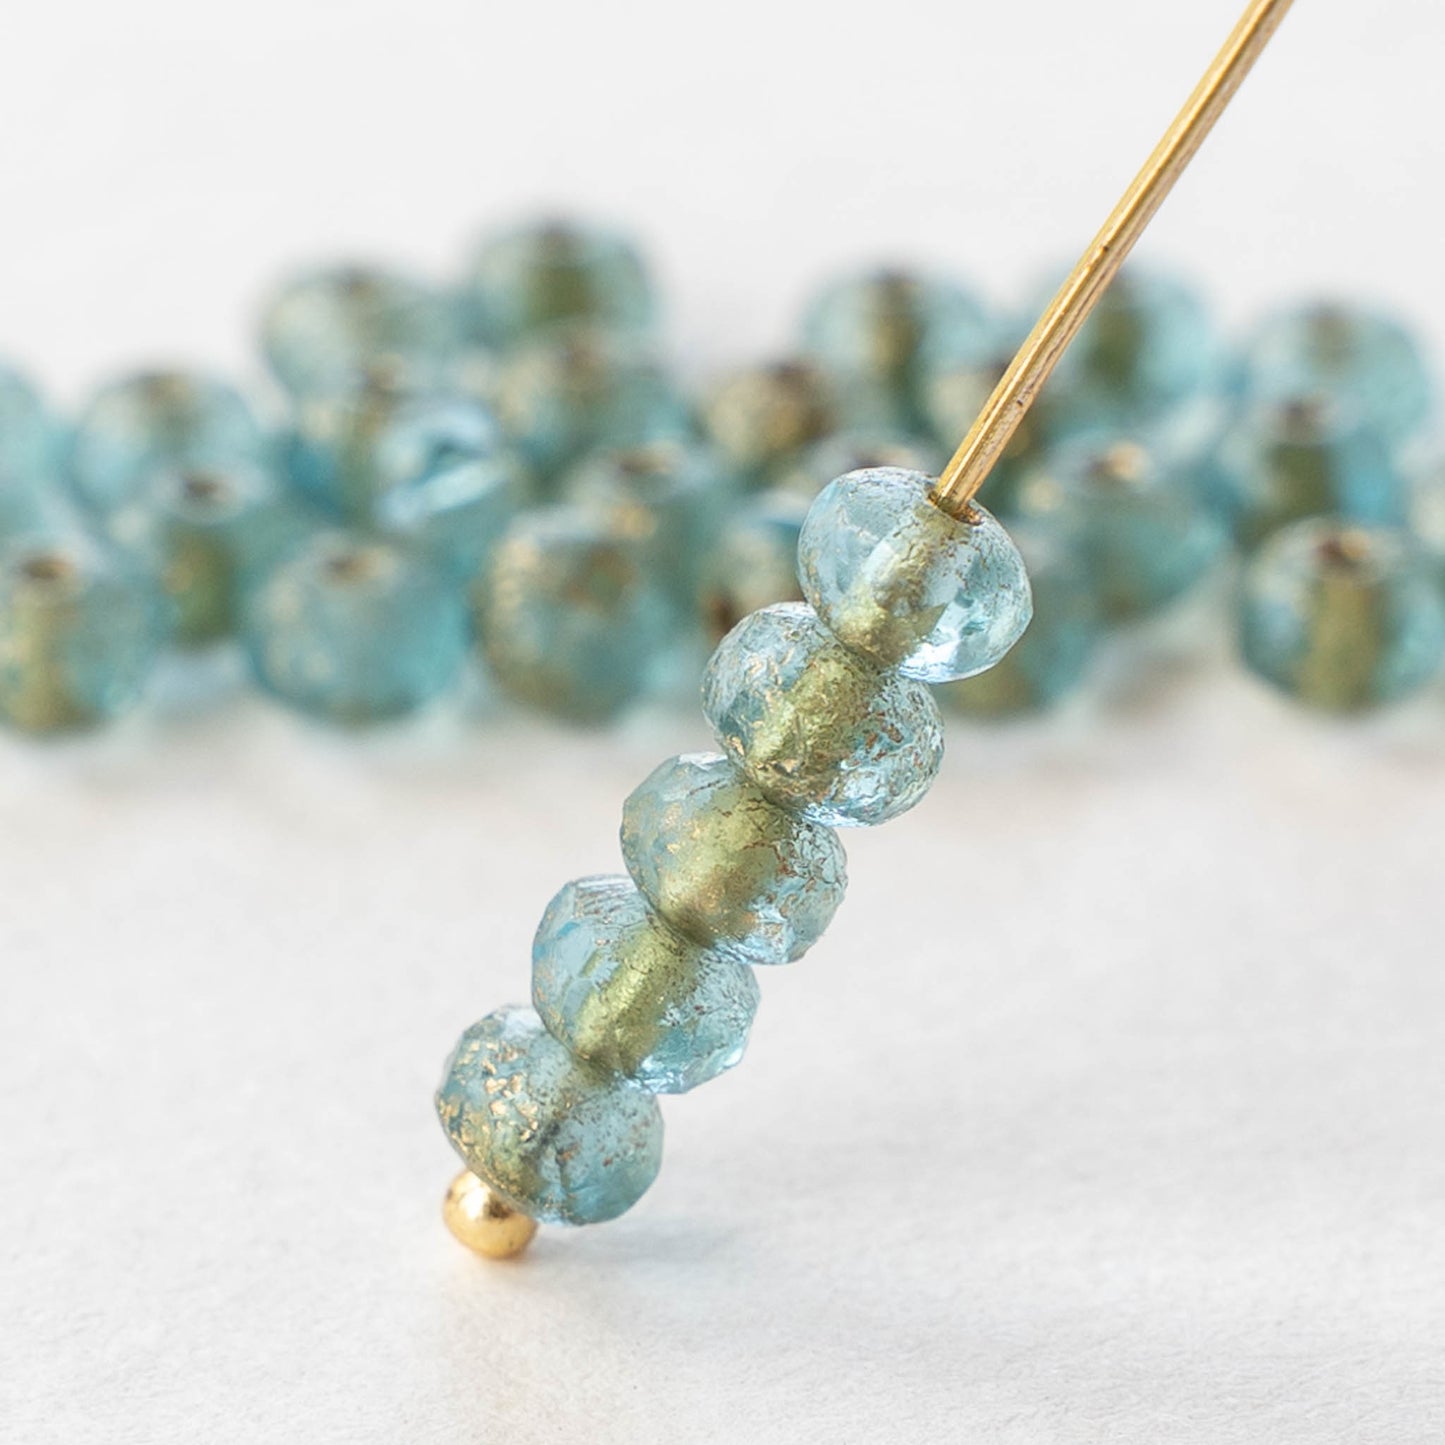 3x5mm Rondelle - Baby Blue Etched Finish with Gold Wash - 30 Beads